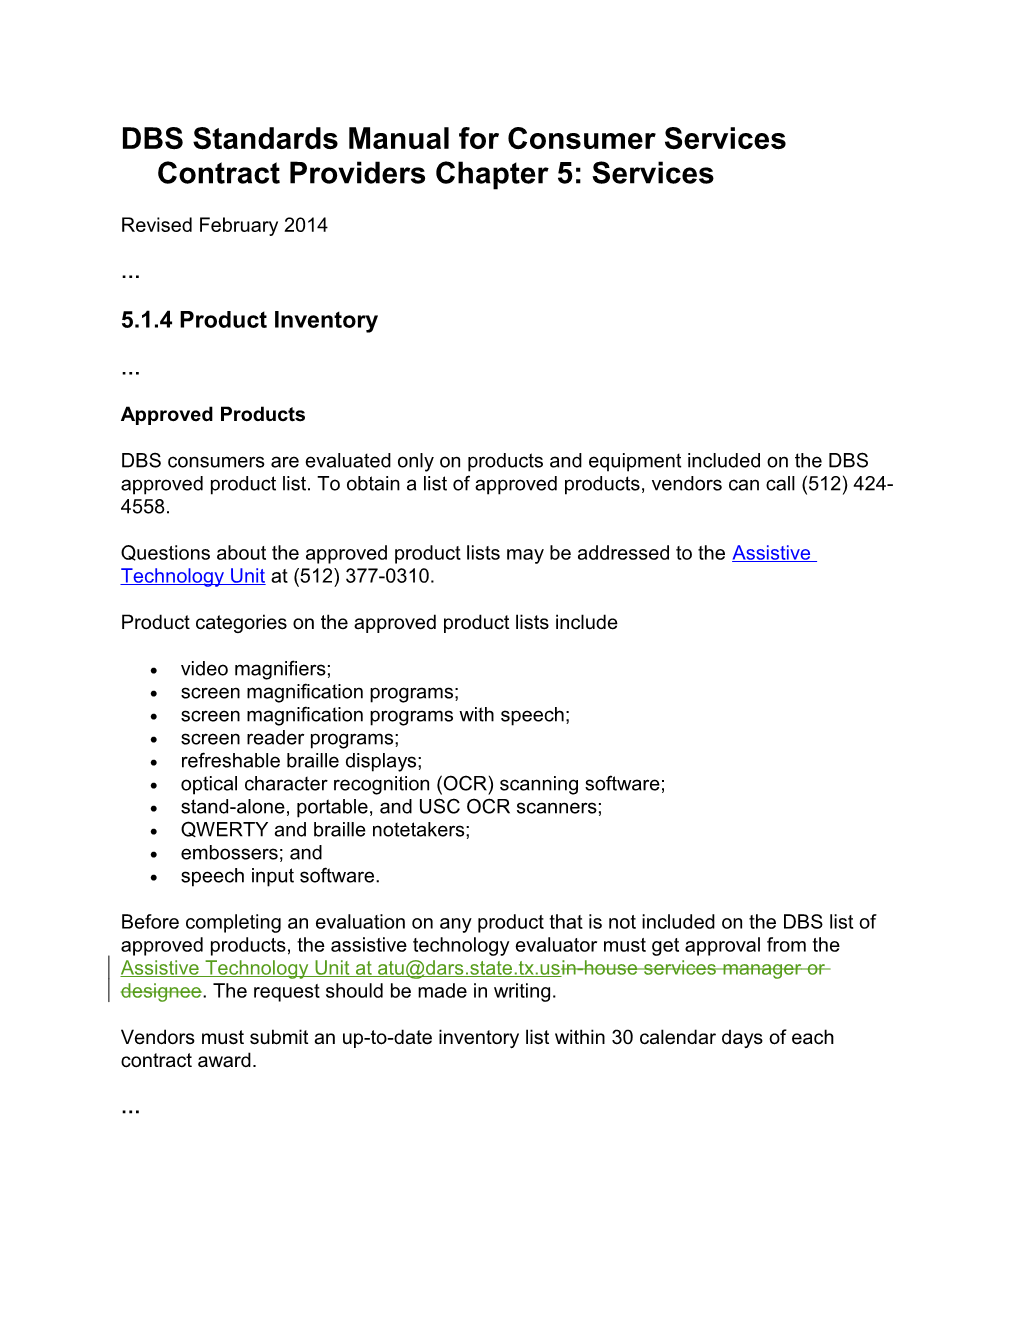 DBS Standards Manual Chapter 5 Revisions, February 2014